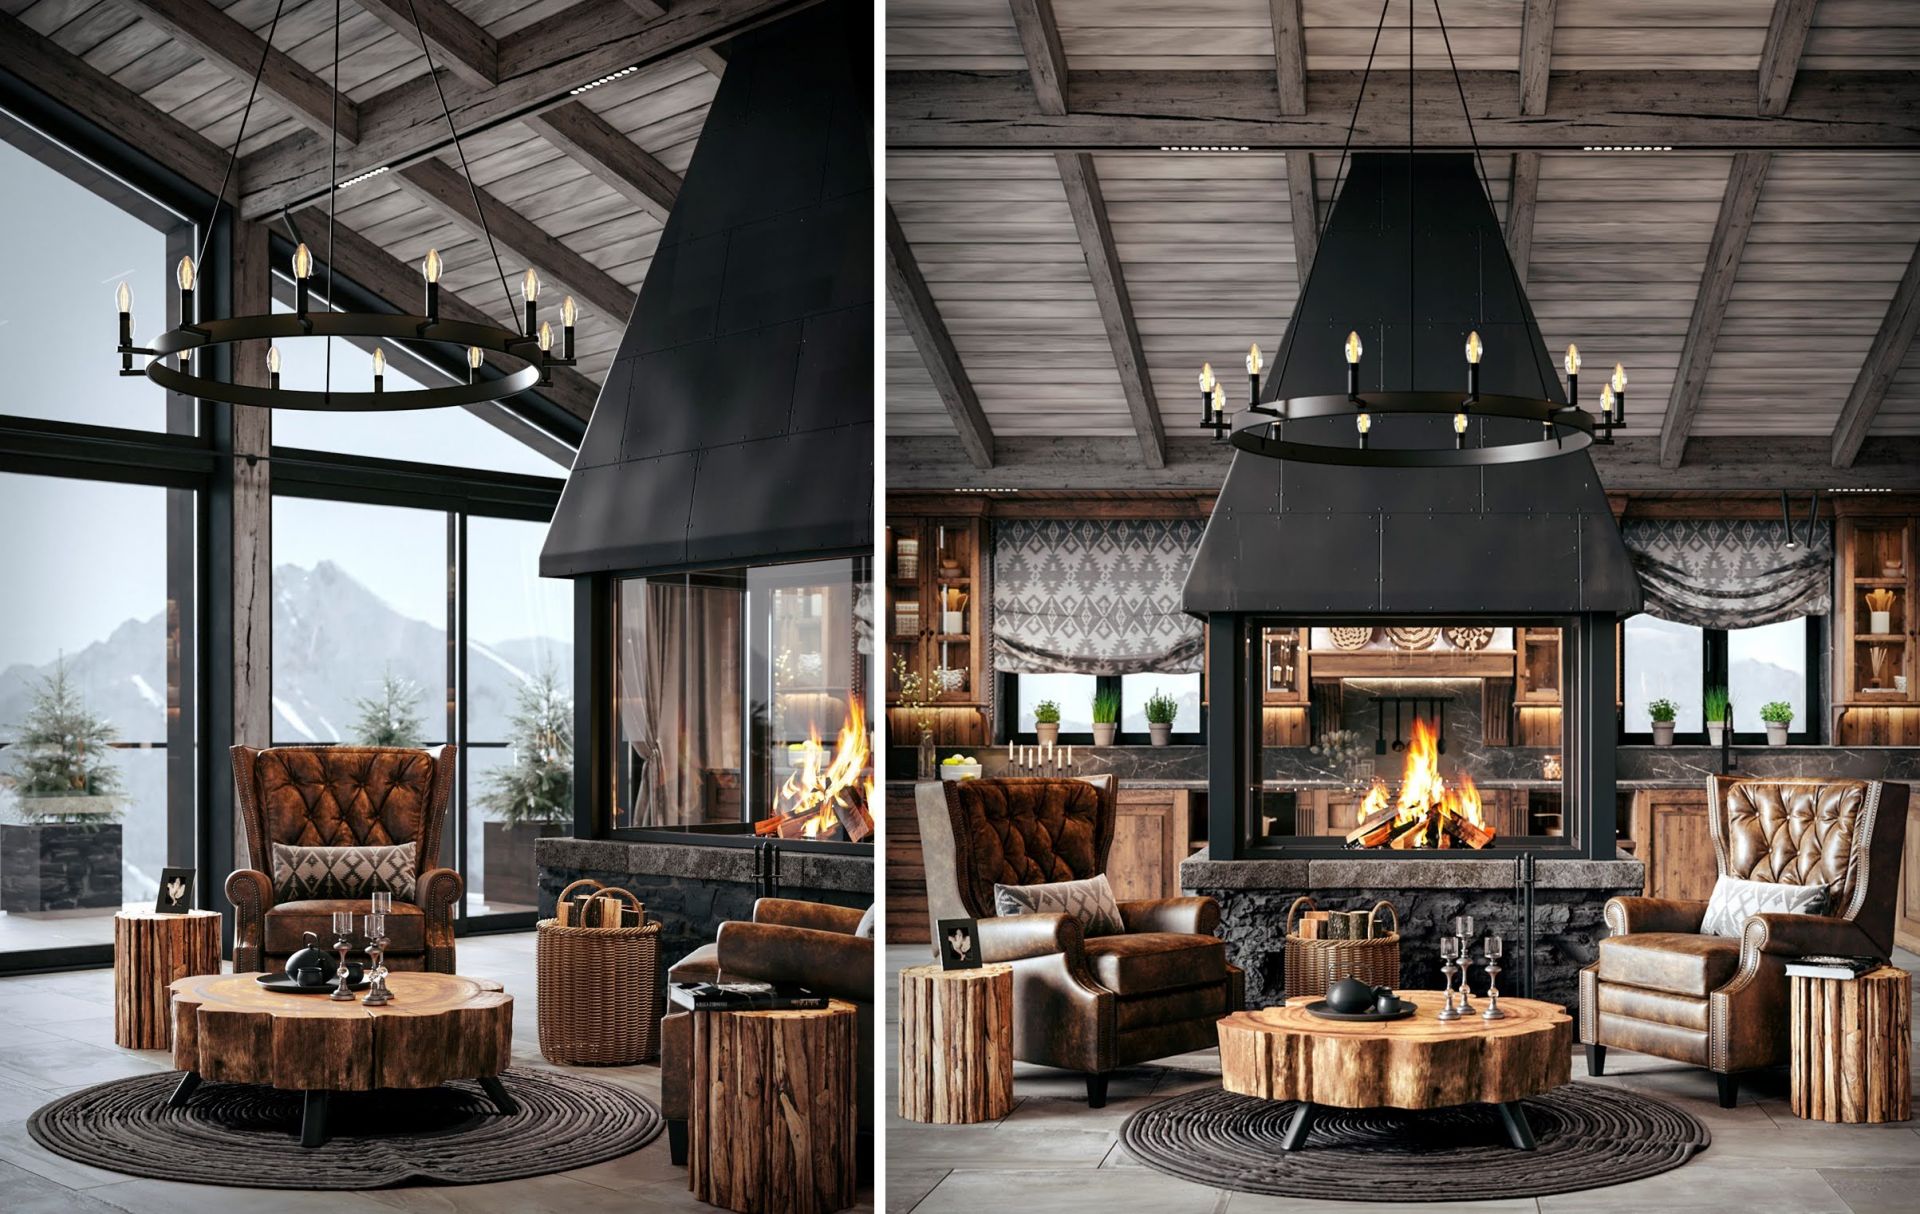 Chalet style living room interior